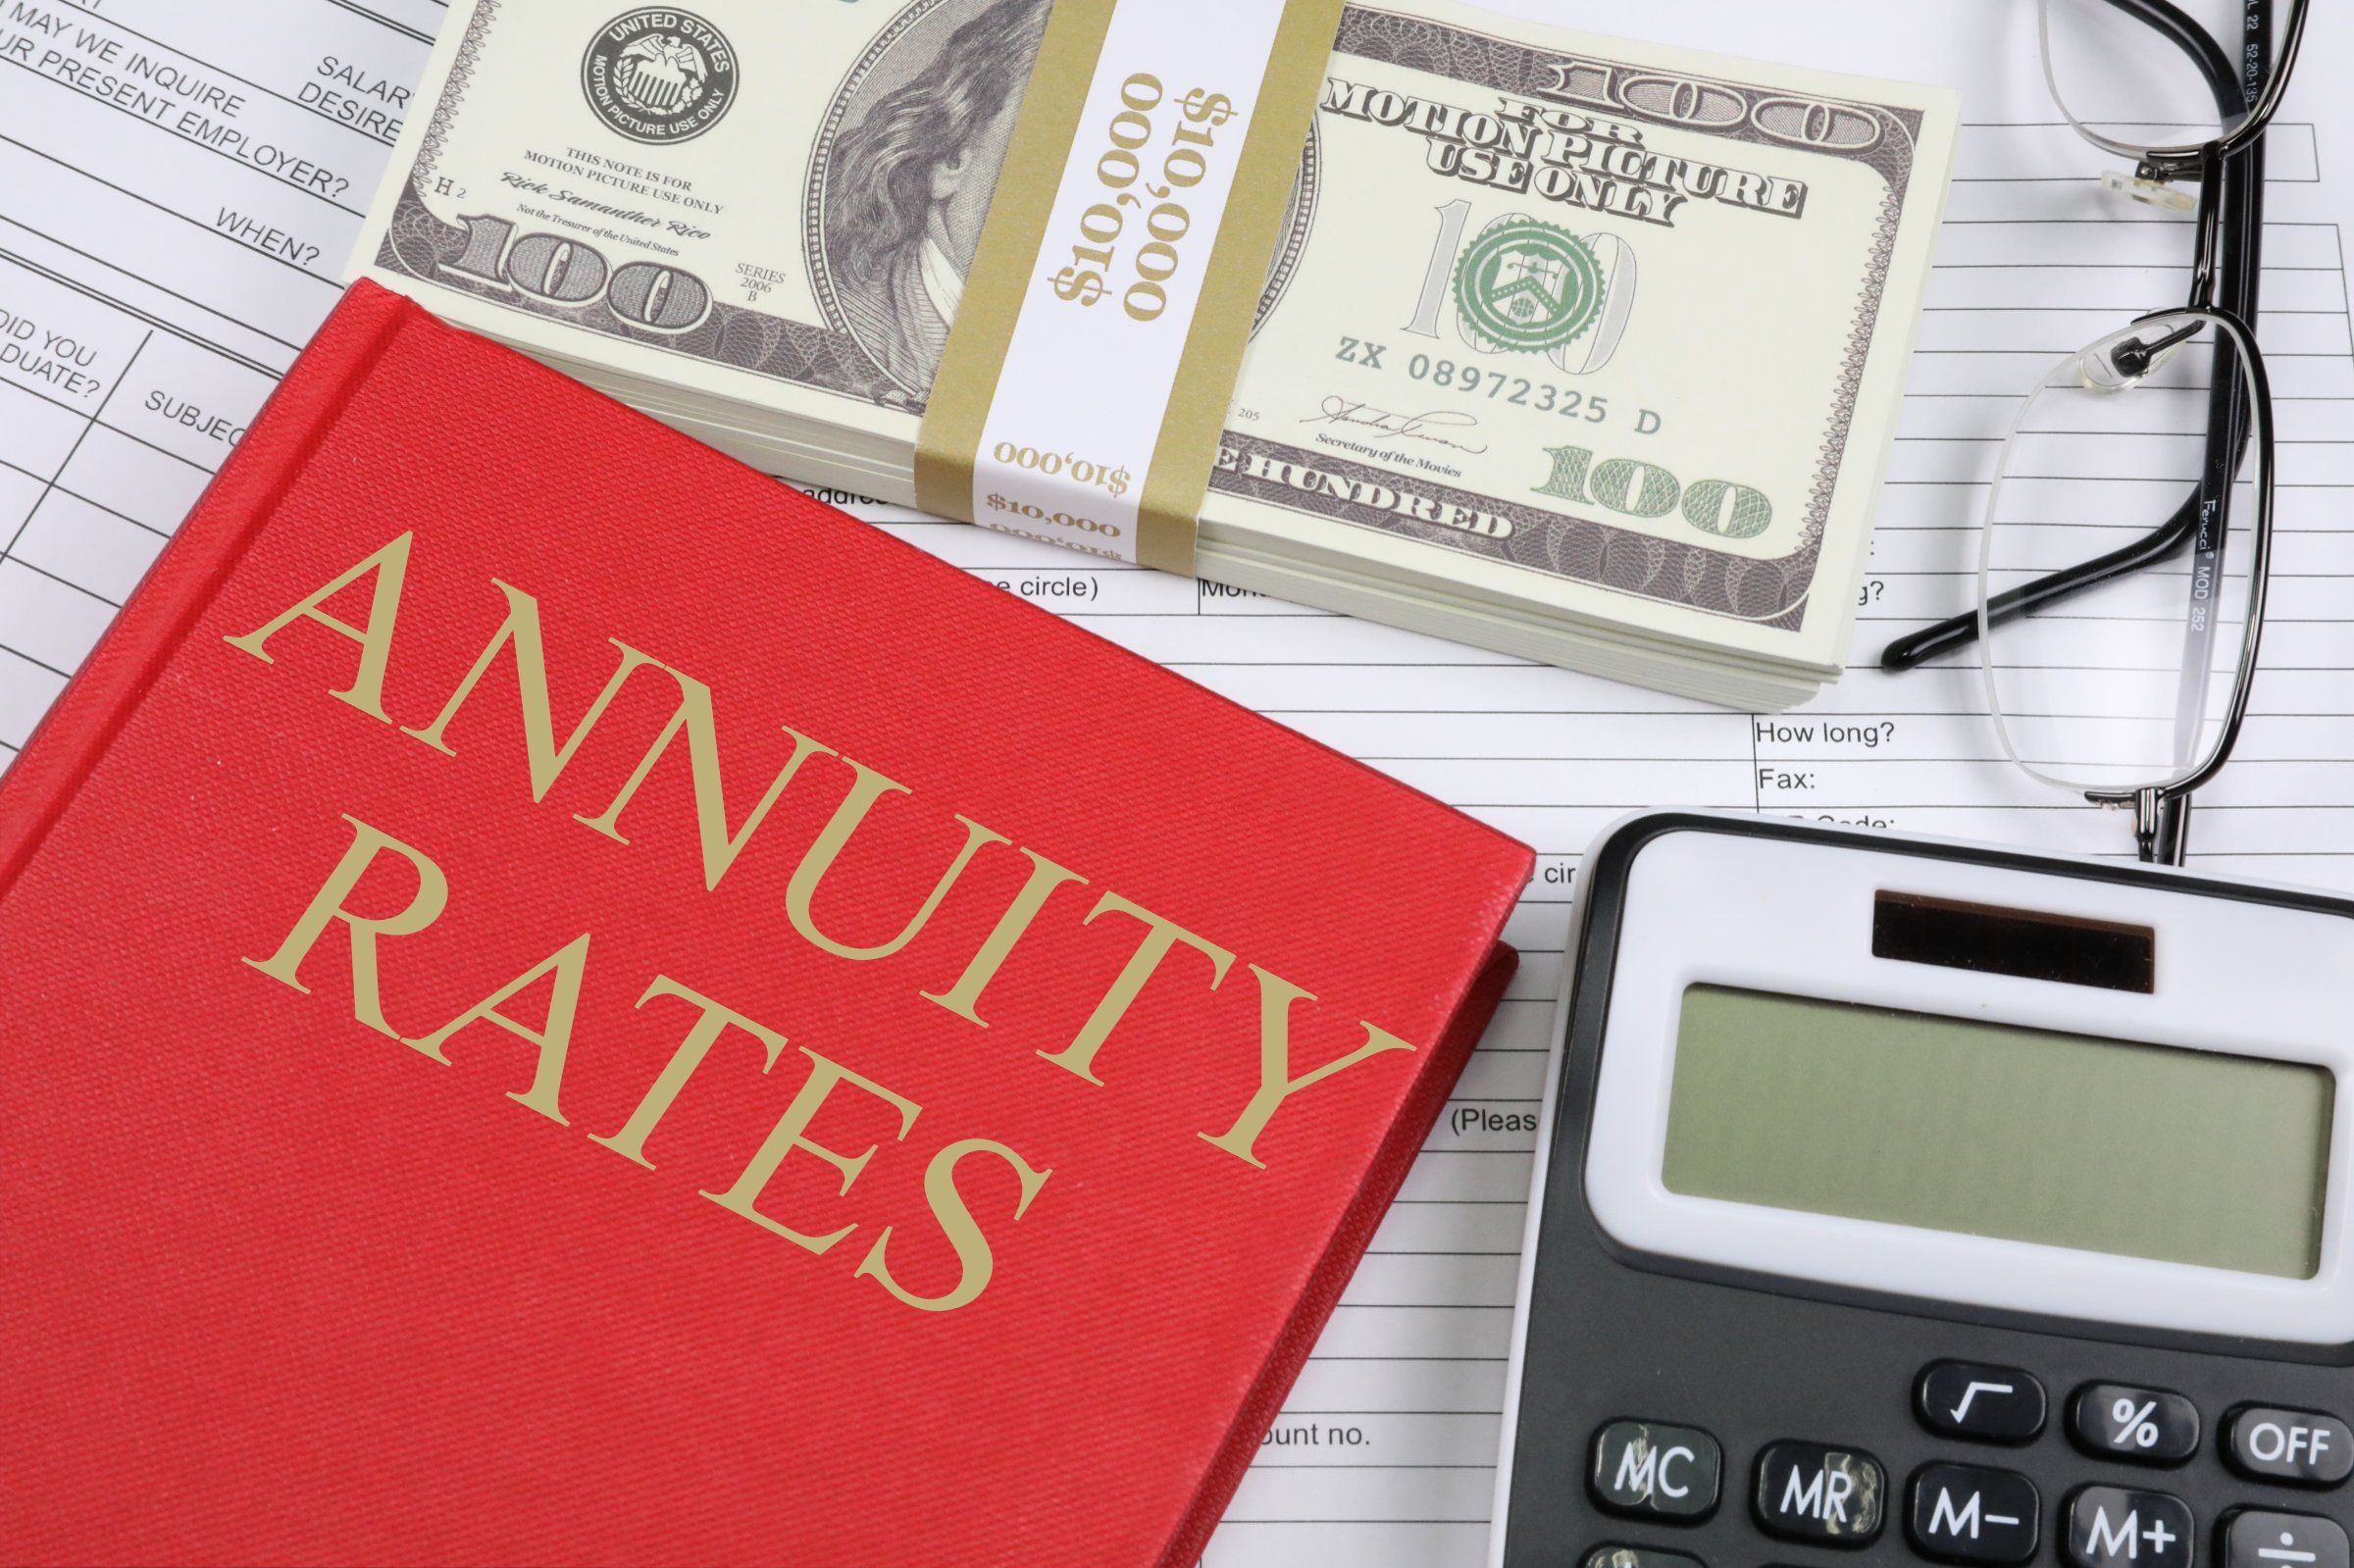 annuity rates